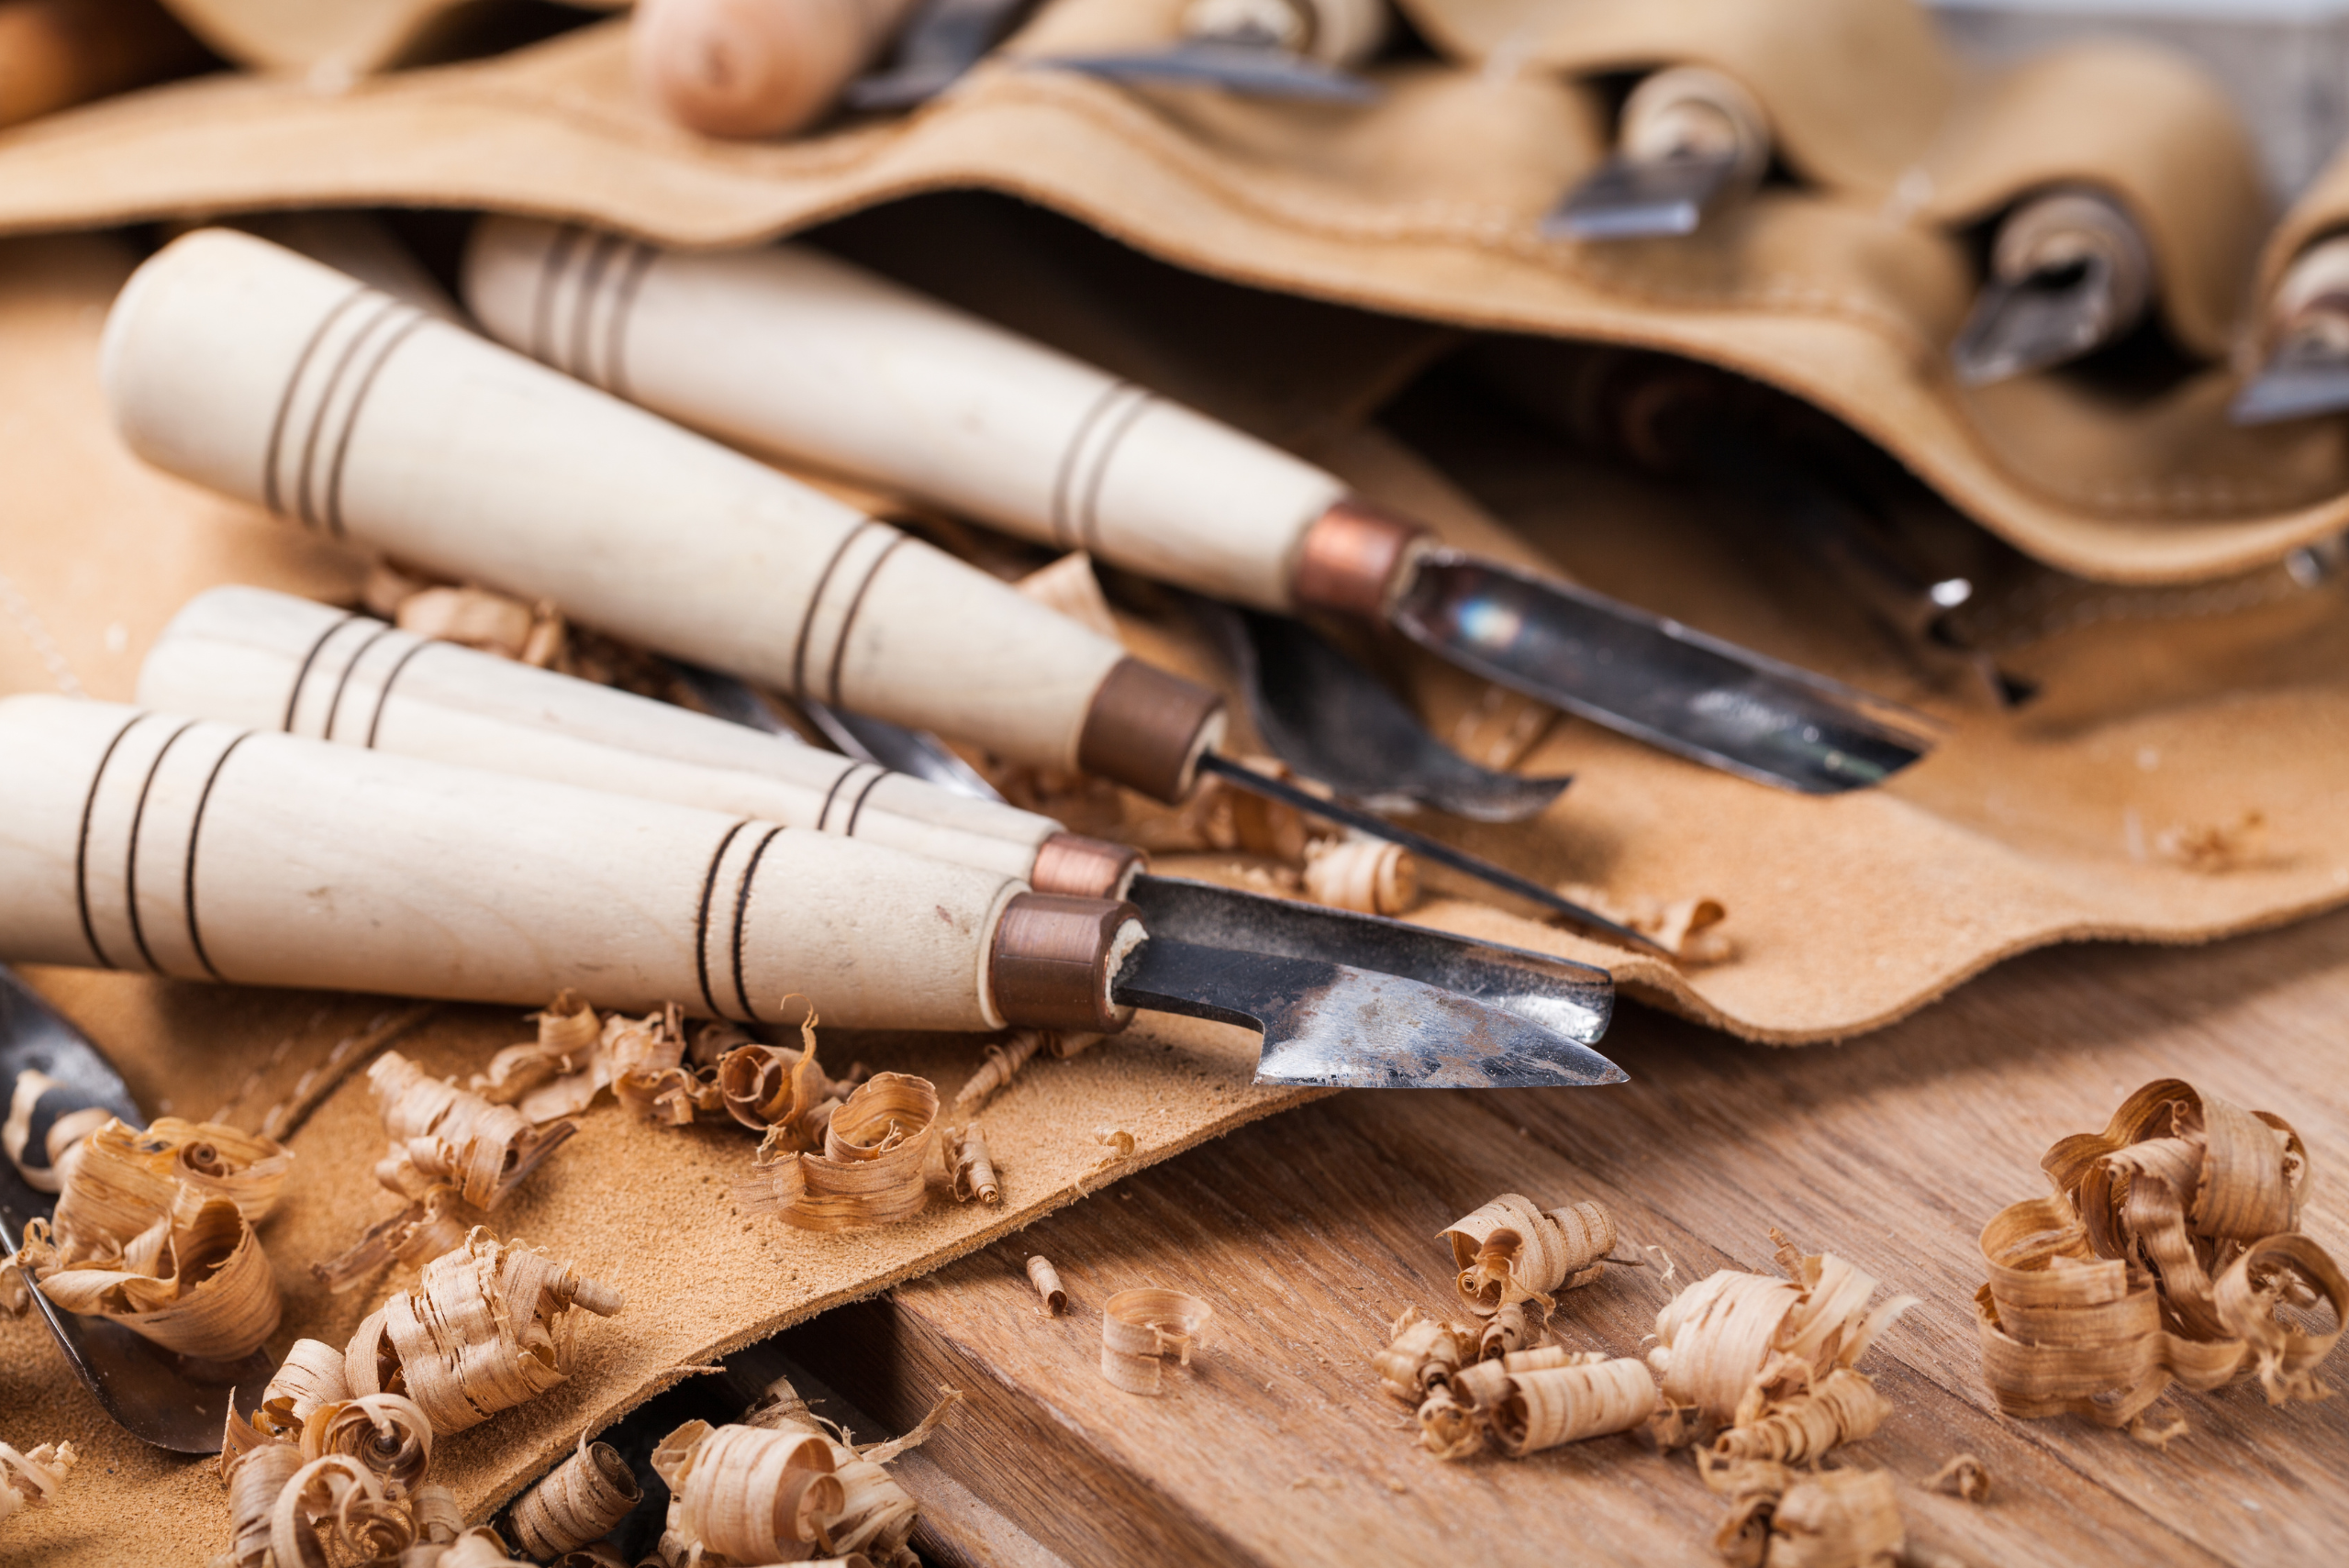 Carving tools and wood shavings on top of a leather carrying case.